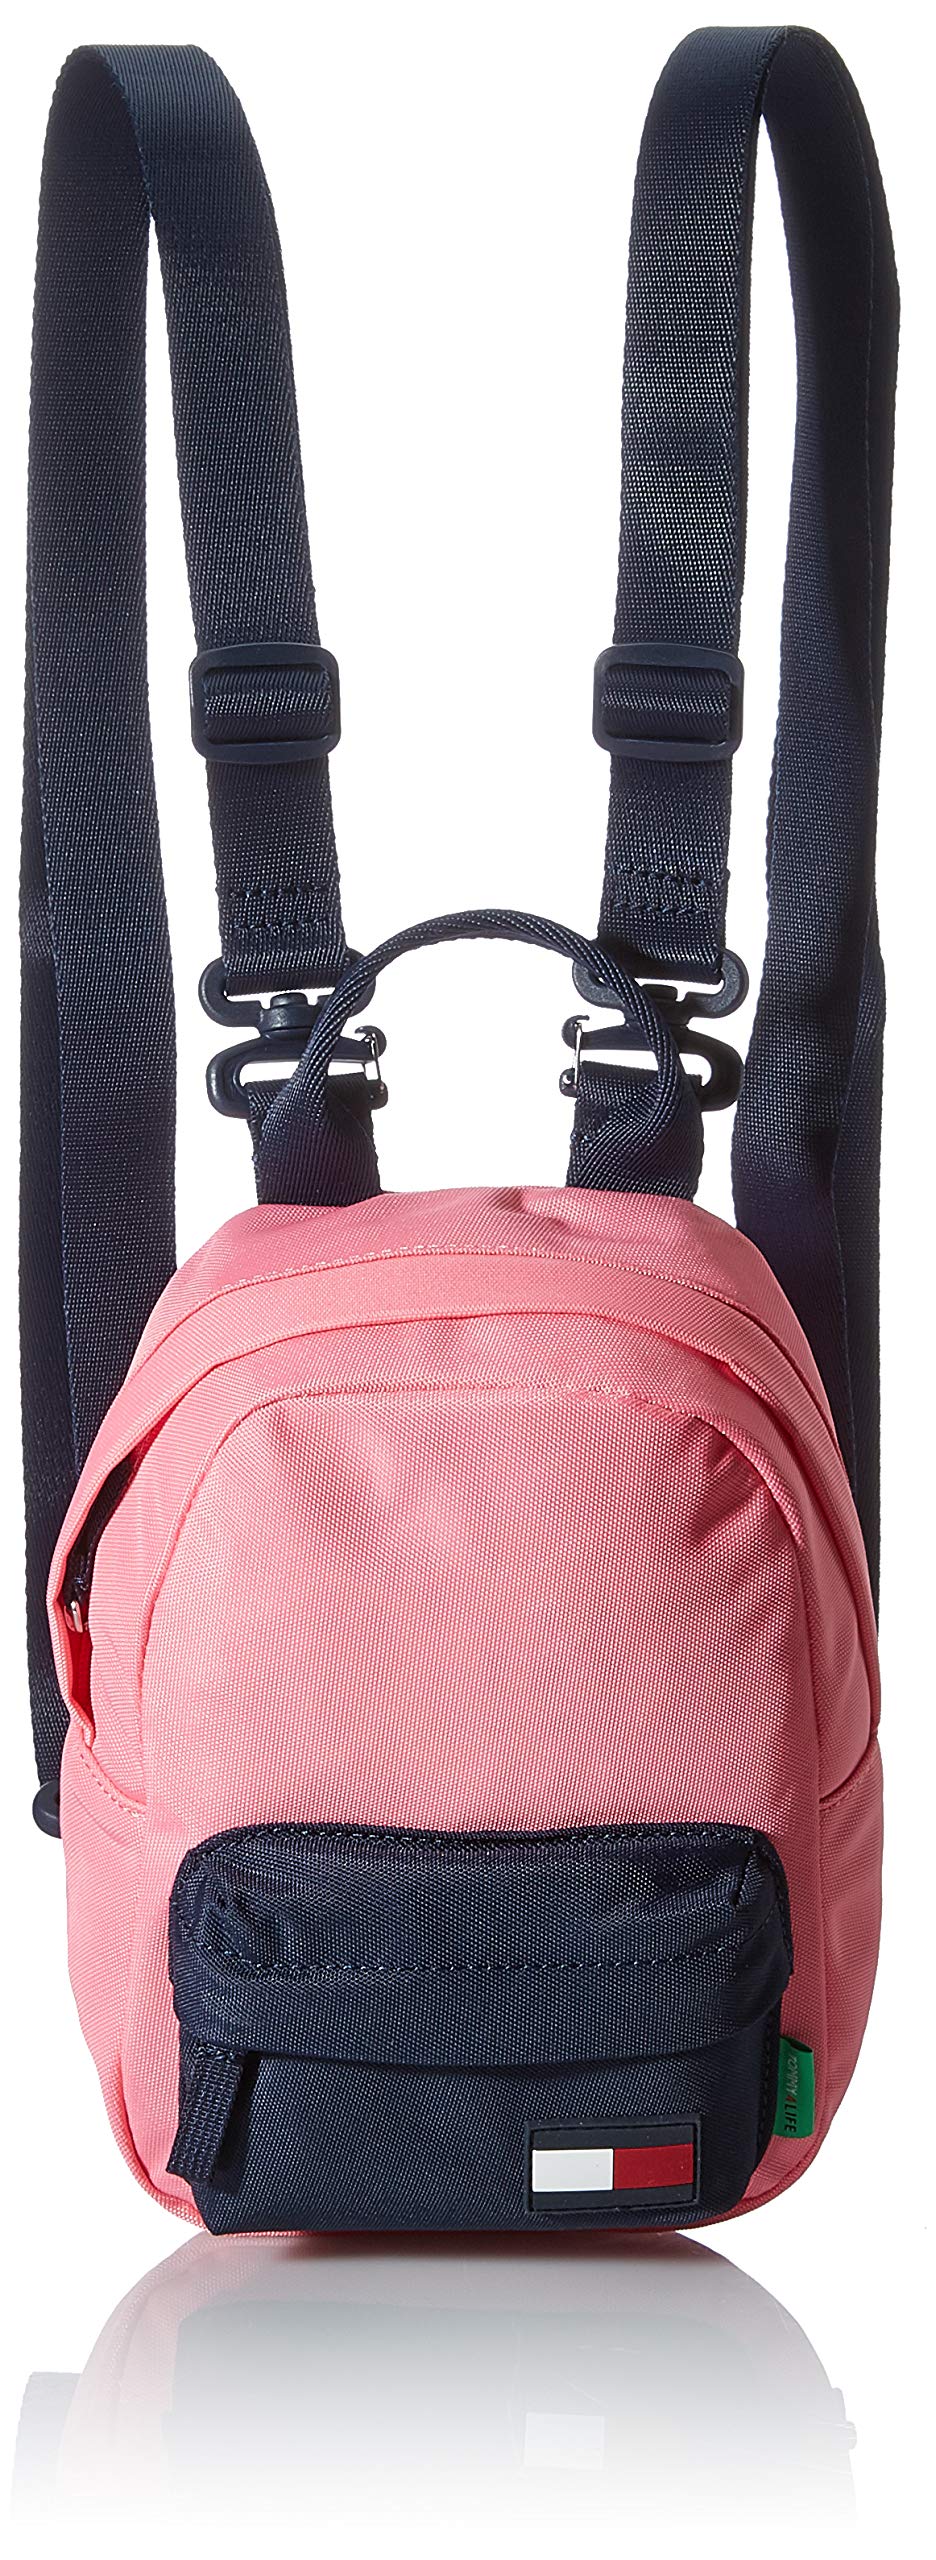 Tommy Hilfiger Unisex Kids Core Backpack, Exotic Pink, One Size